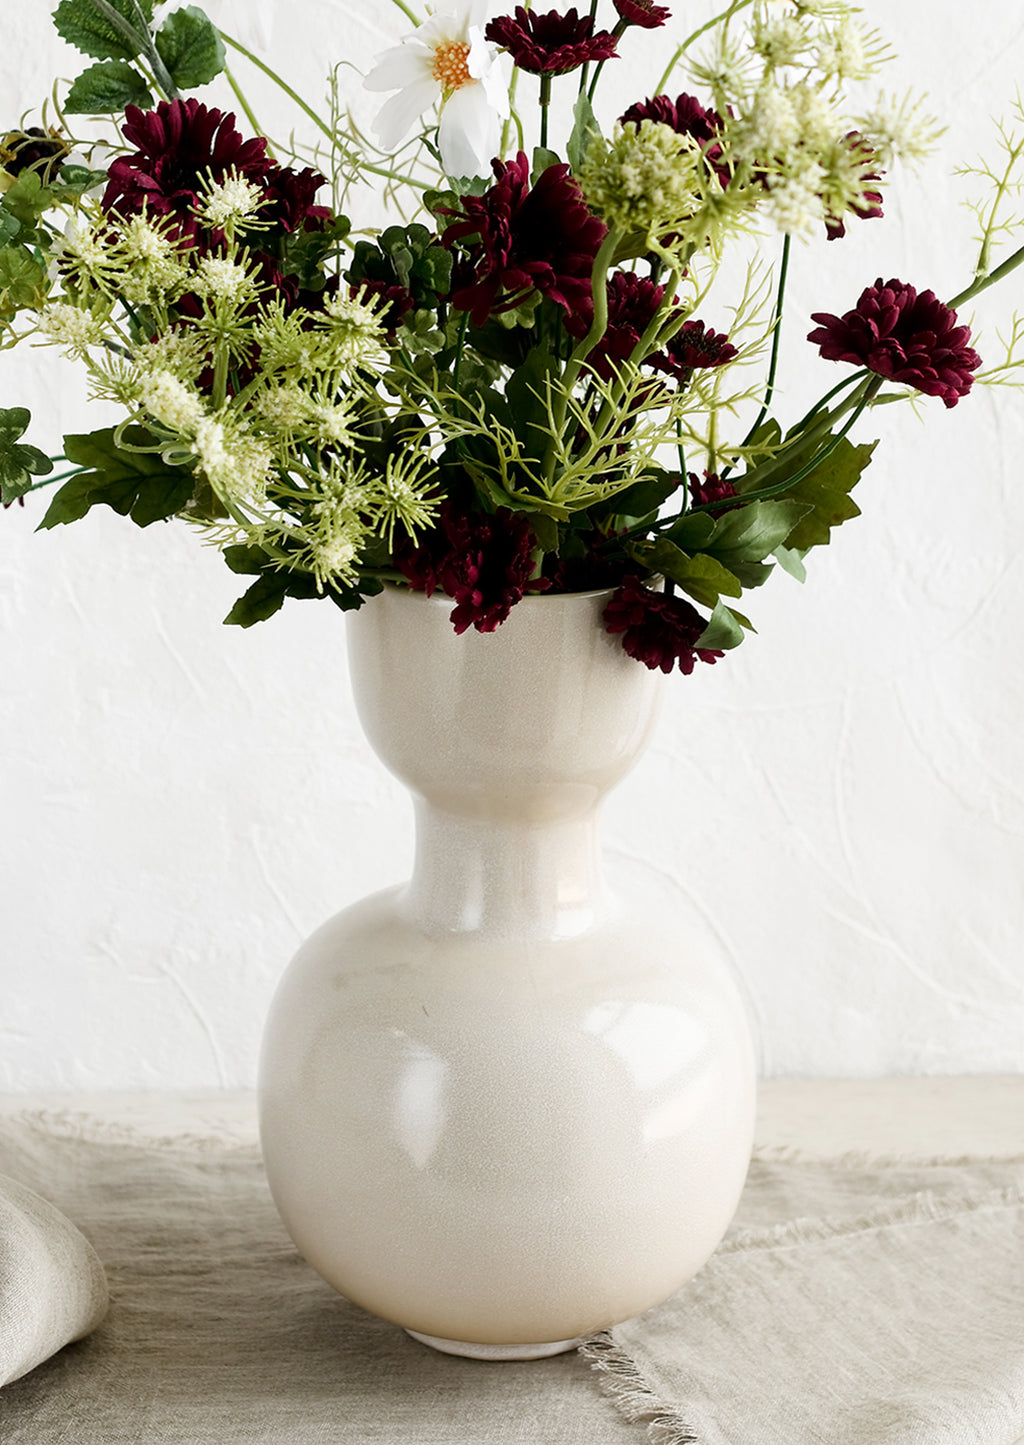 2: A vase with large bouquet of mixed faux flowers.